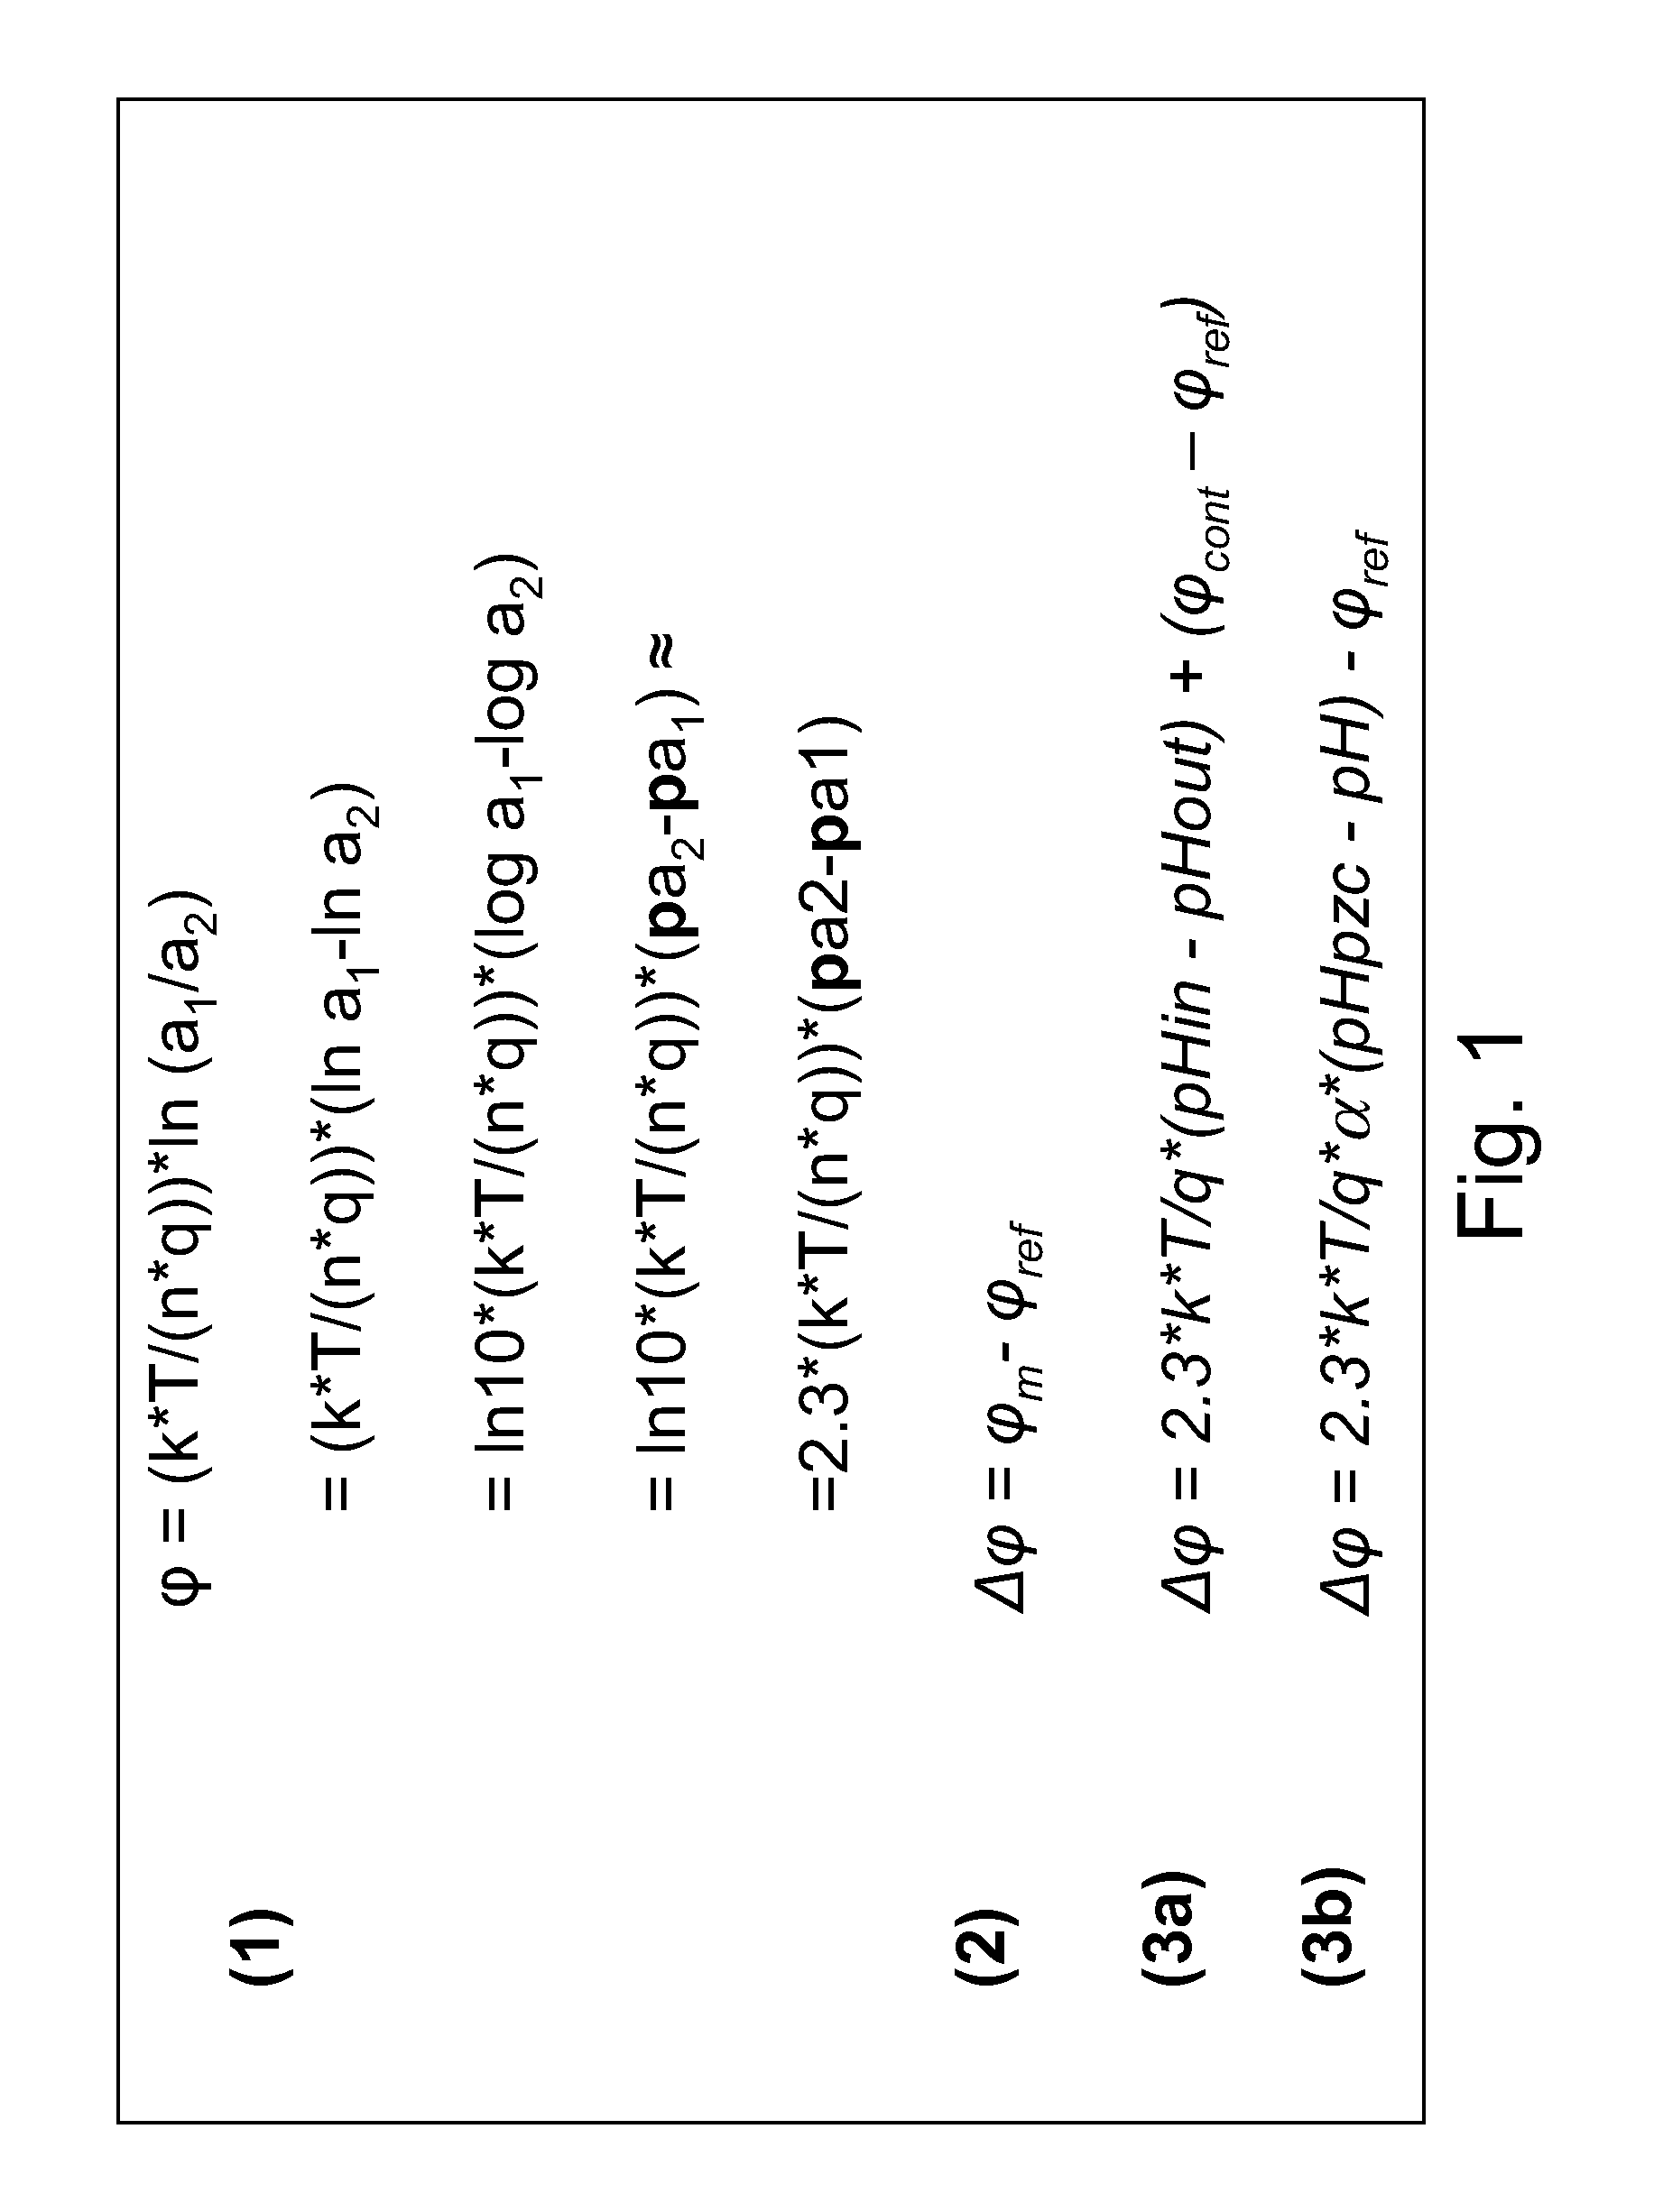 Electrochemical potentiometric sensing without reference electrode